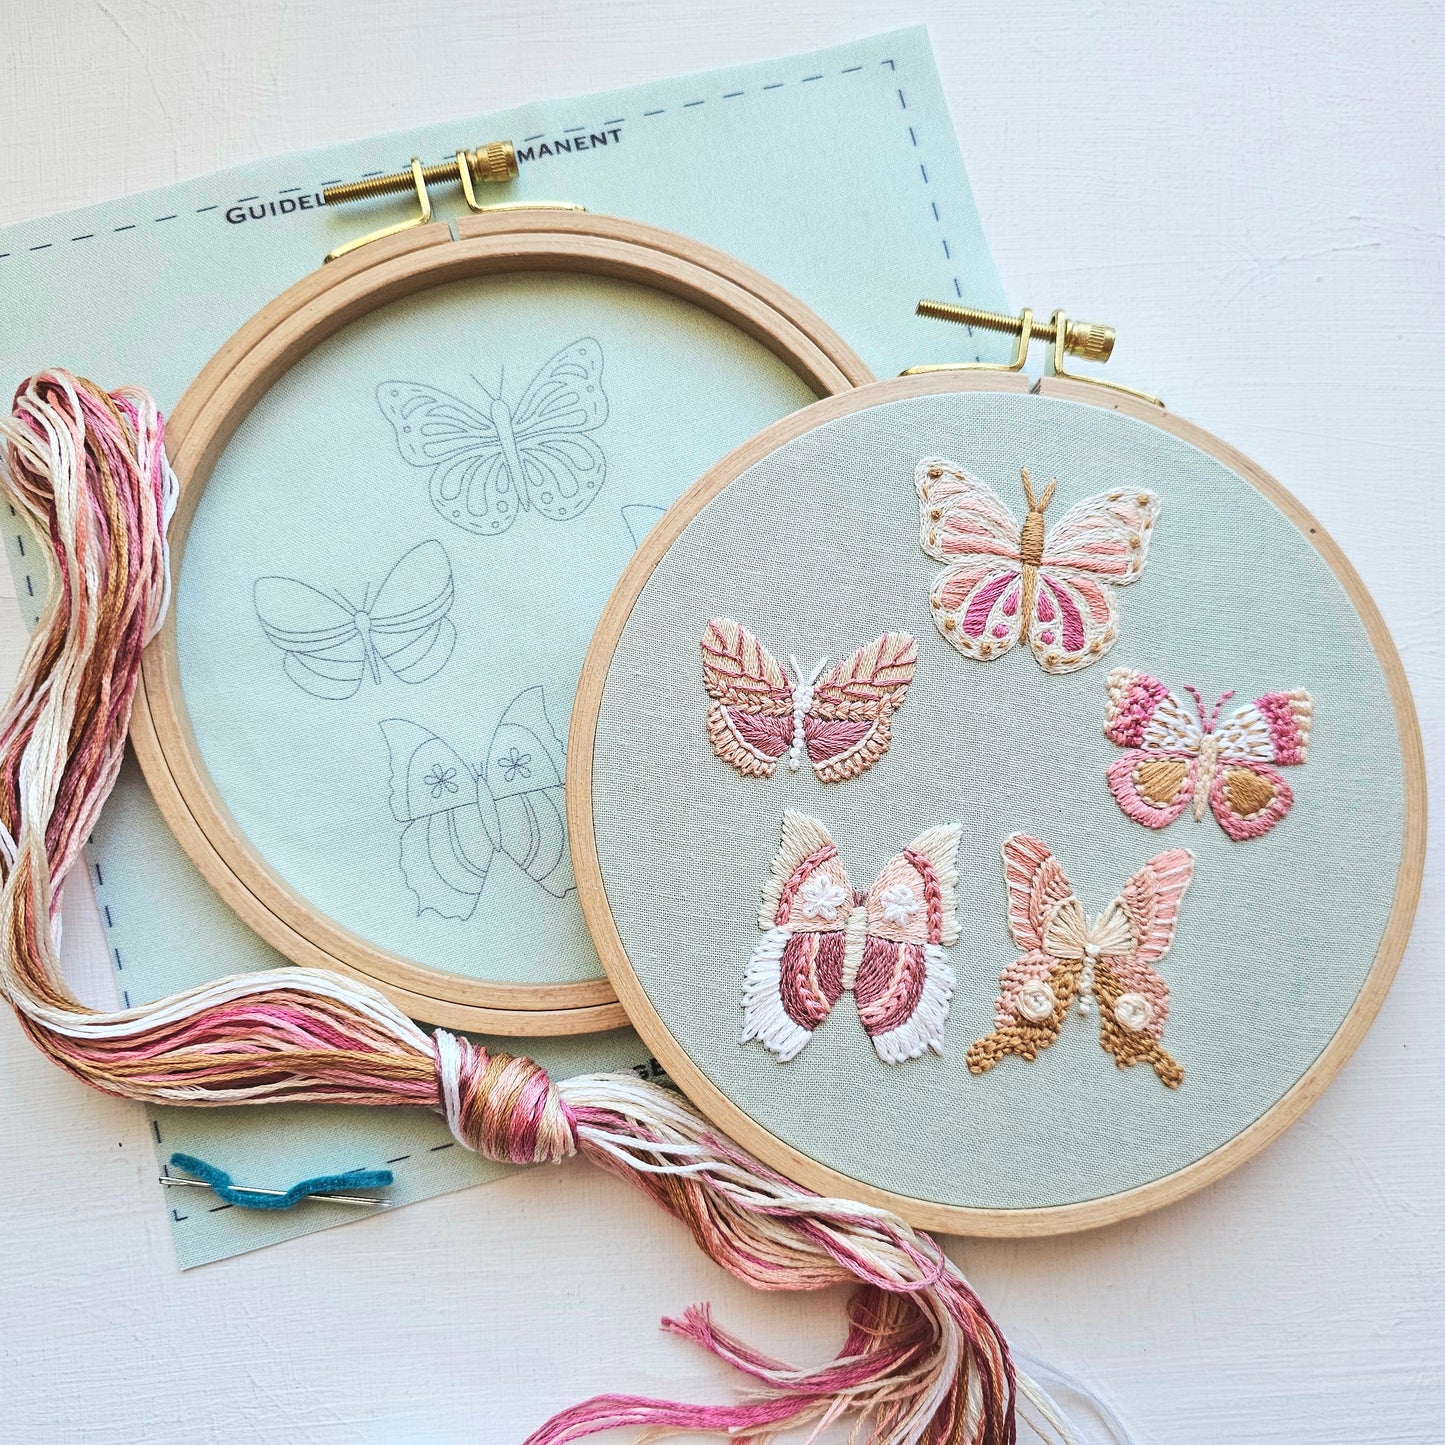 Butterfly Sampler Embroidery Kit